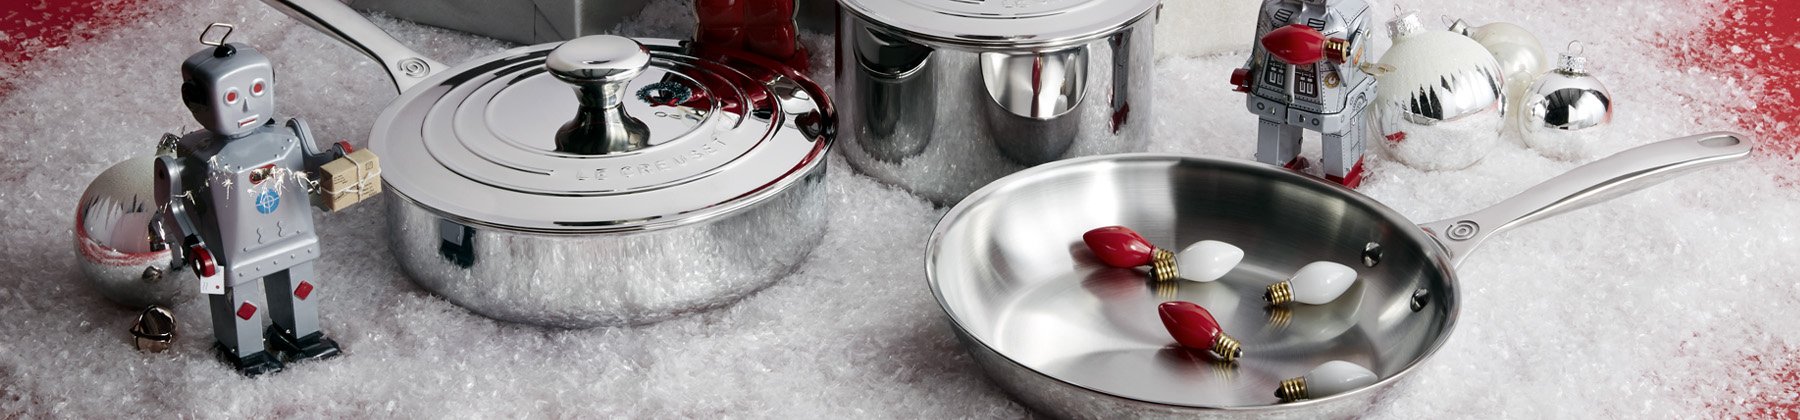 Photo of Le Creuset stainless steel cookware with holiday decor.